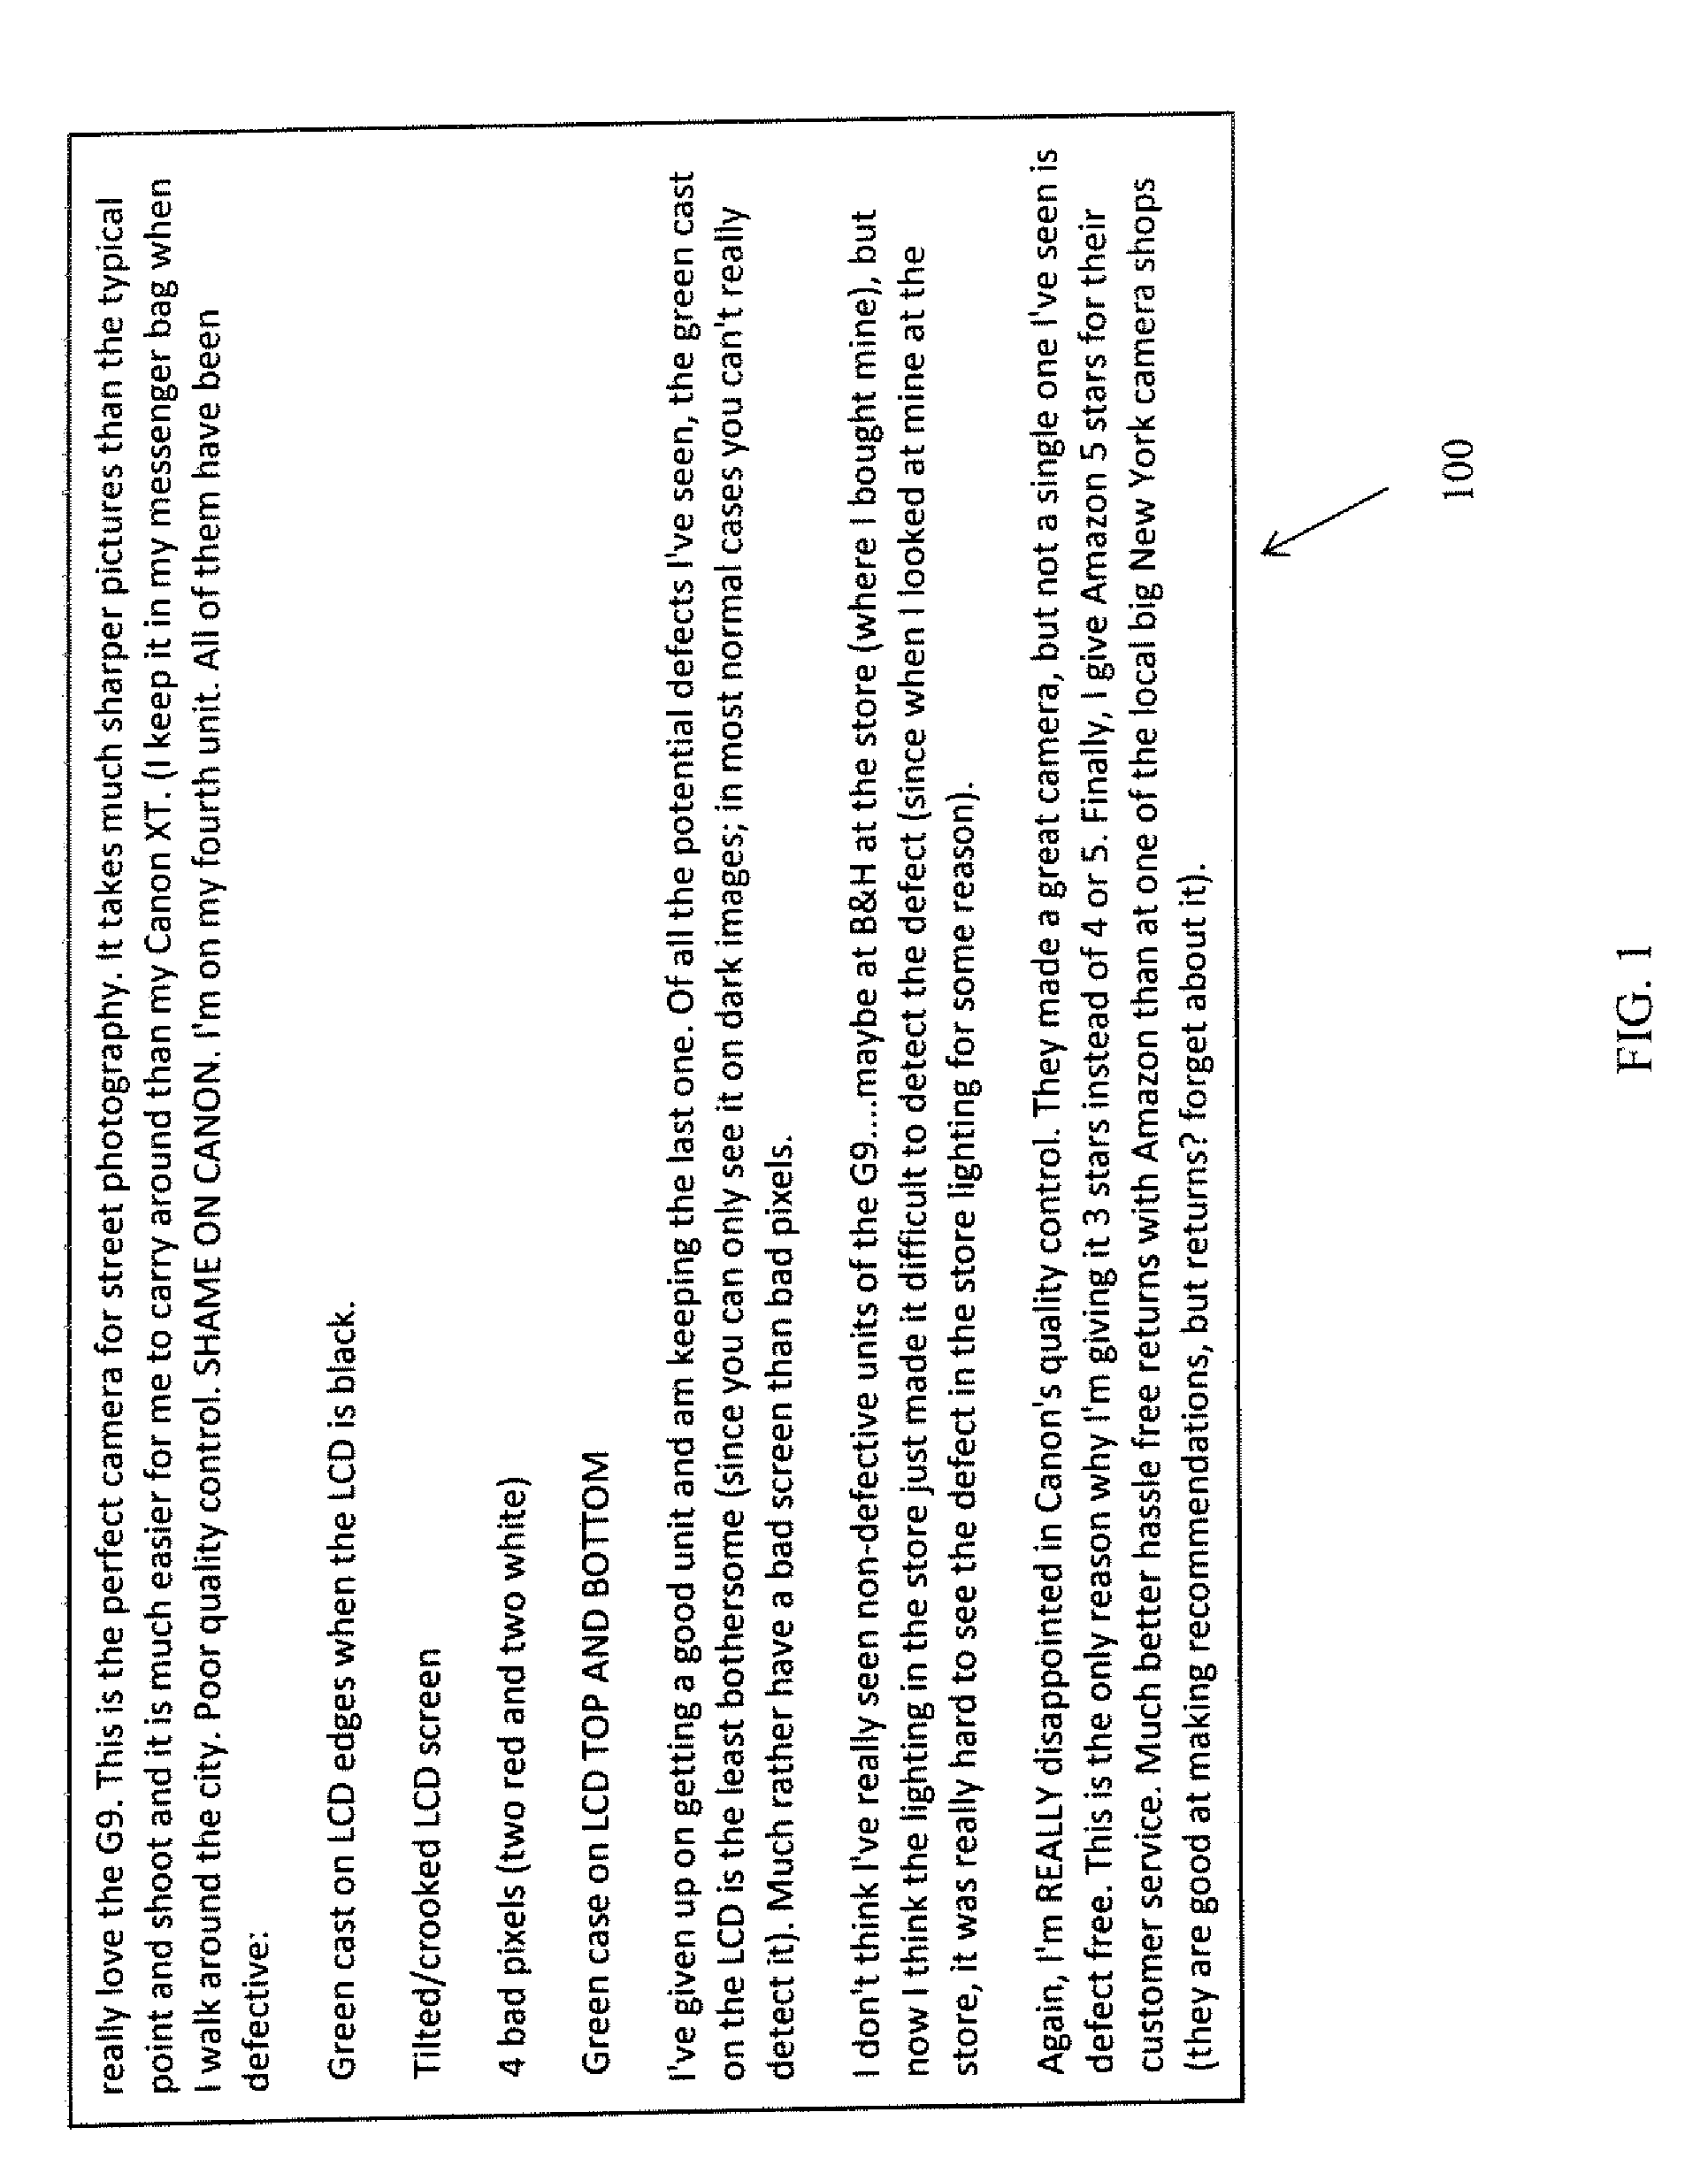 Method and system for semantic analysis of unstructured data